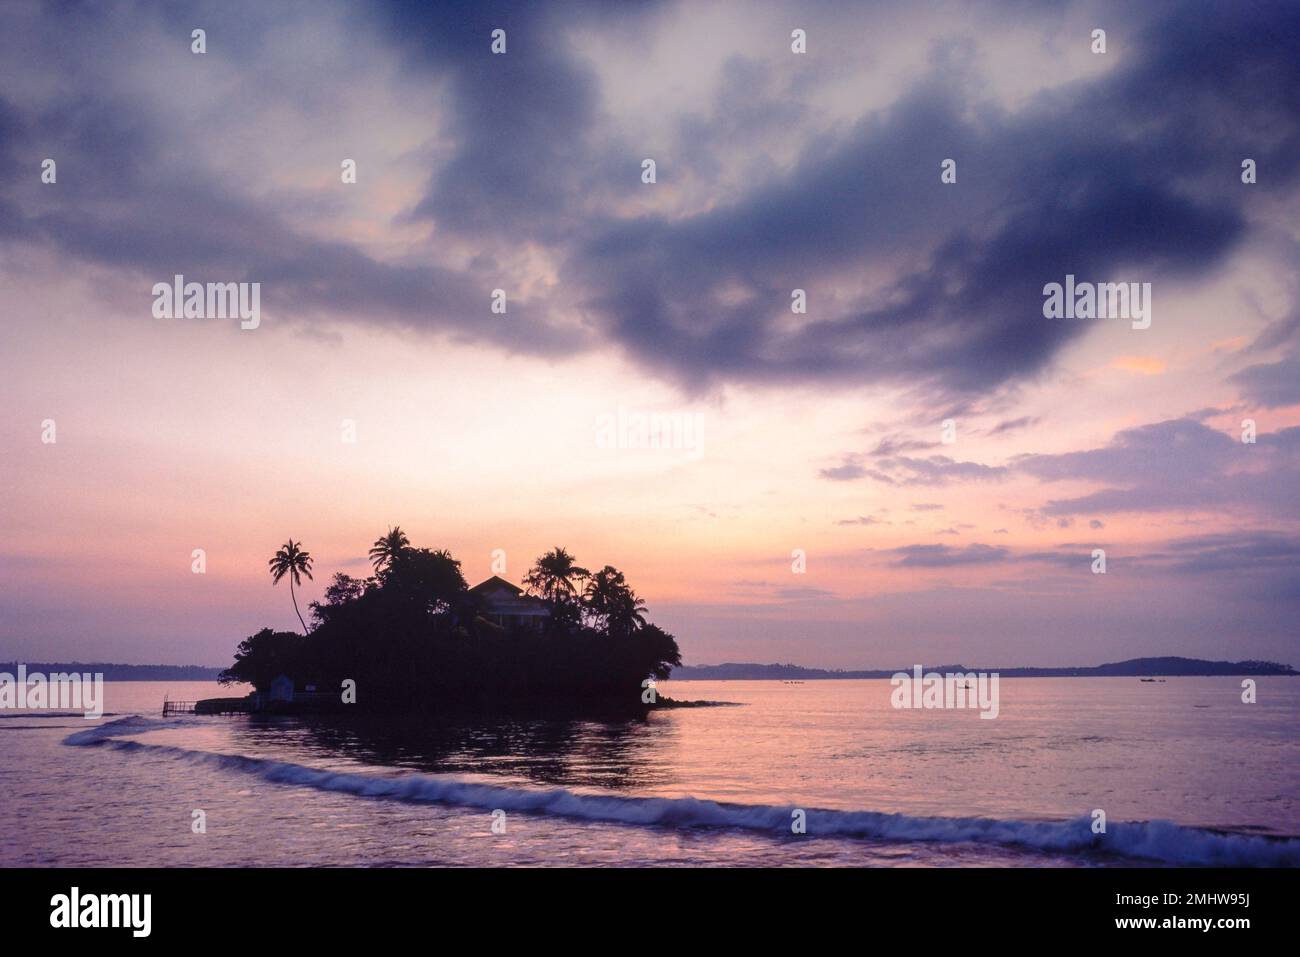 Taprobane Island Sri Lanka, view at dusk of Taprobane Island, a private island with its own hotel sited in Weligama Bay, South Province, Sri Lanka Stock Photo